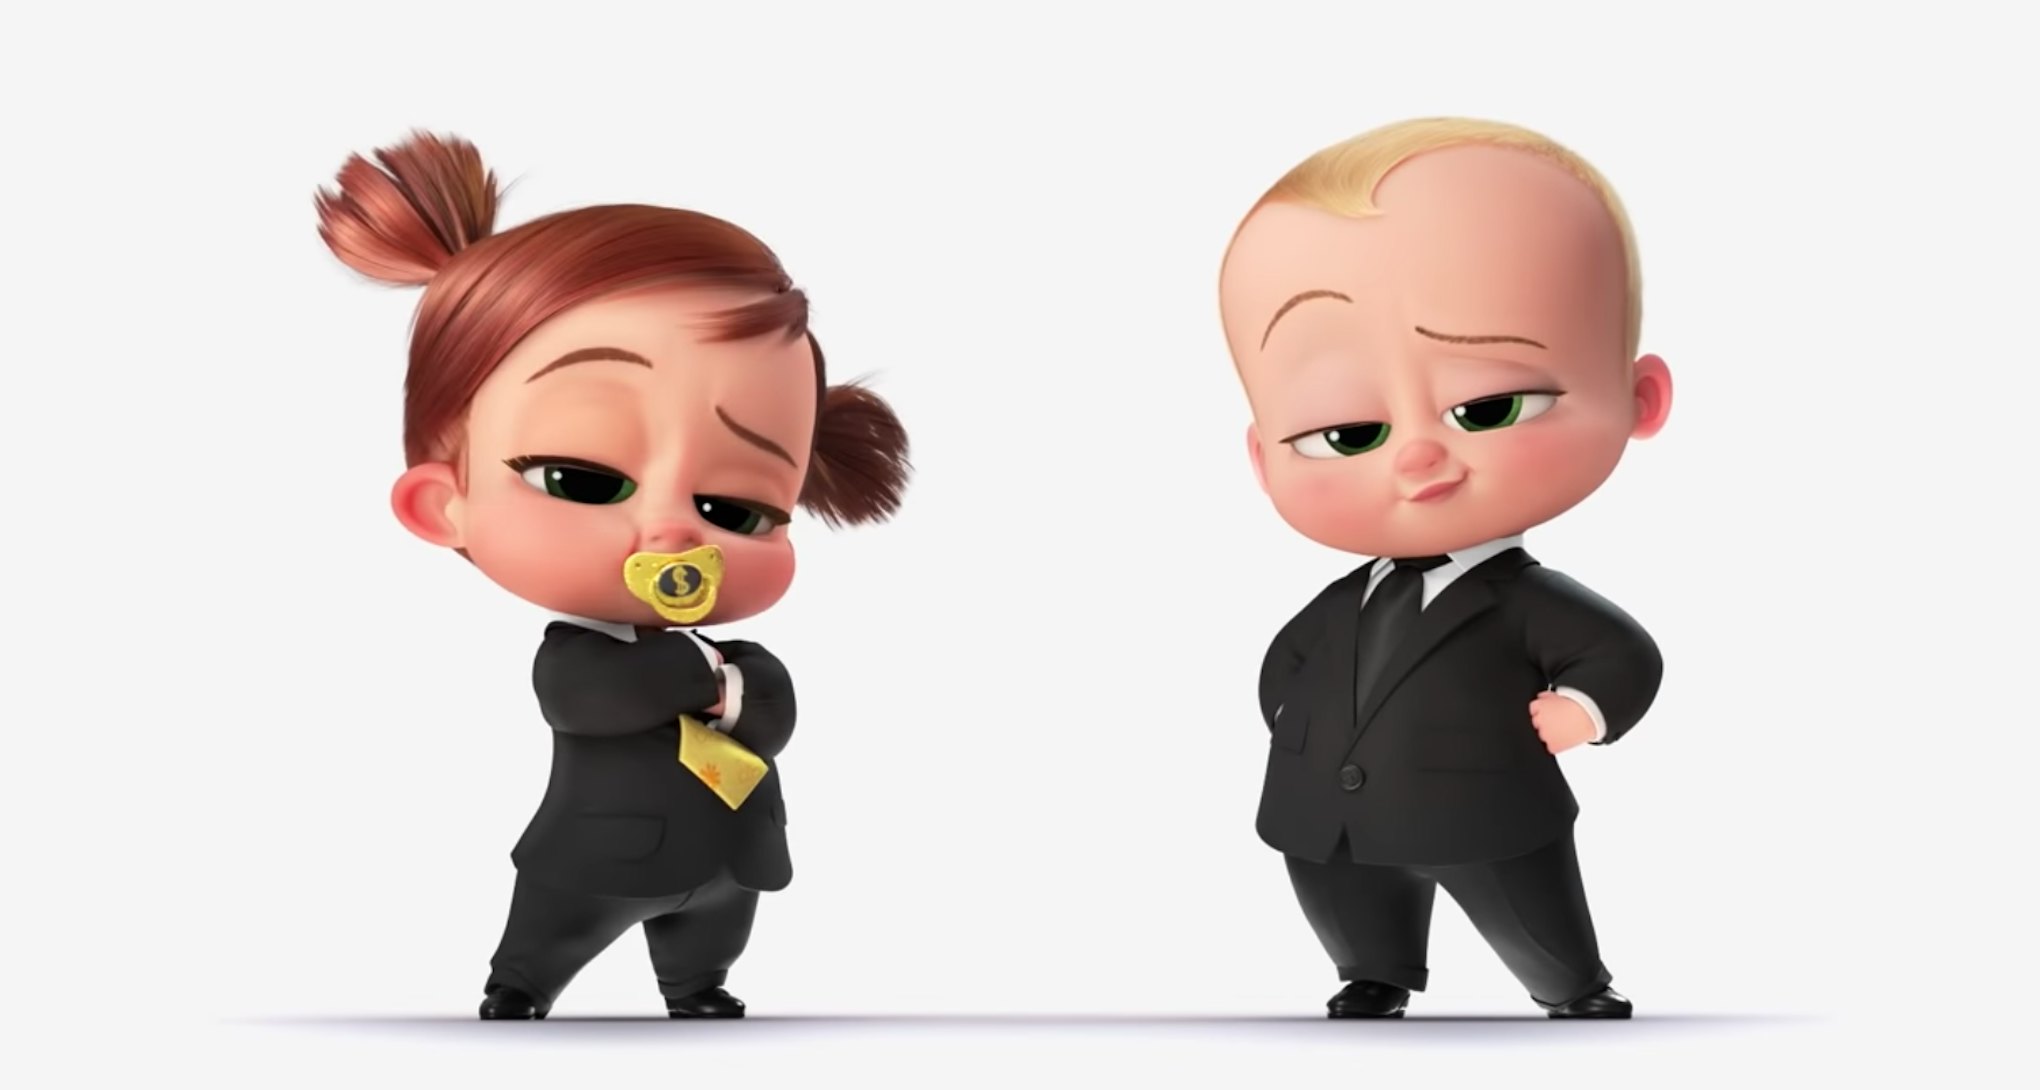 The 'Boss Baby' sequel is a ray of hope in our desolate world